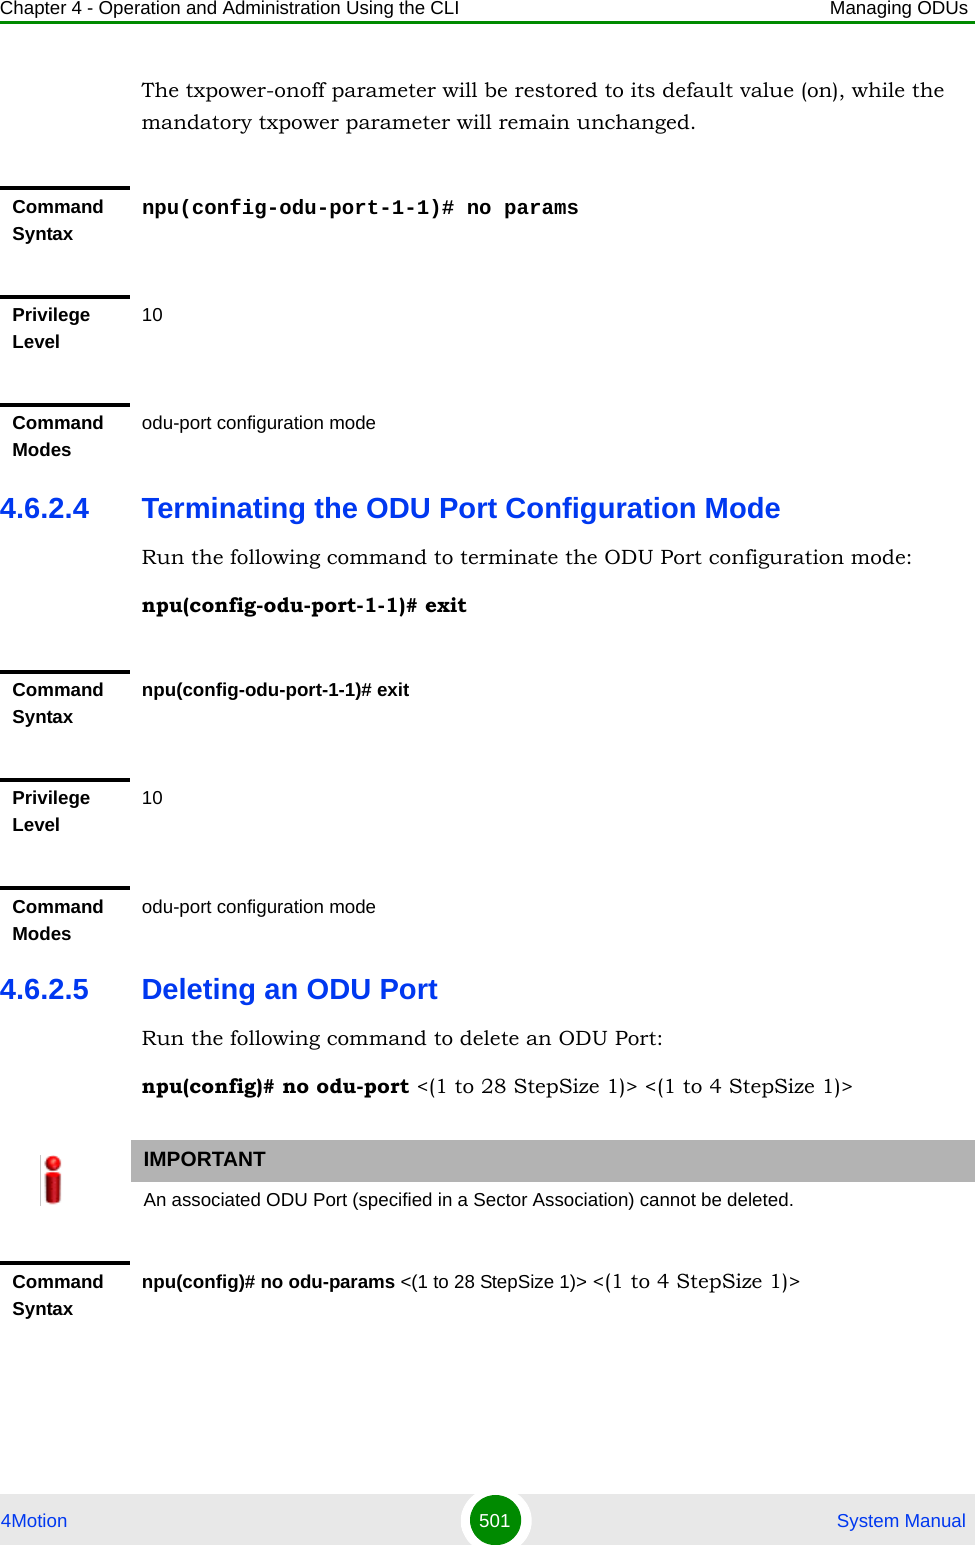 Chapter 4 - Operation and Administration Using the CLI Managing ODUs4Motion 501  System ManualThe txpower-onoff parameter will be restored to its default value (on), while the mandatory txpower parameter will remain unchanged.4.6.2.4 Terminating the ODU Port Configuration ModeRun the following command to terminate the ODU Port configuration mode:npu(config-odu-port-1-1)# exit4.6.2.5 Deleting an ODU PortRun the following command to delete an ODU Port:npu(config)# no odu-port &lt;(1 to 28 StepSize 1)&gt; &lt;(1 to 4 StepSize 1)&gt;Command Syntaxnpu(config-odu-port-1-1)# no paramsPrivilege Level10Command Modesodu-port configuration modeCommand Syntaxnpu(config-odu-port-1-1)# exitPrivilege Level10Command Modesodu-port configuration modeIMPORTANTAn associated ODU Port (specified in a Sector Association) cannot be deleted.Command Syntaxnpu(config)# no odu-params &lt;(1 to 28 StepSize 1)&gt; &lt;(1 to 4 StepSize 1)&gt;